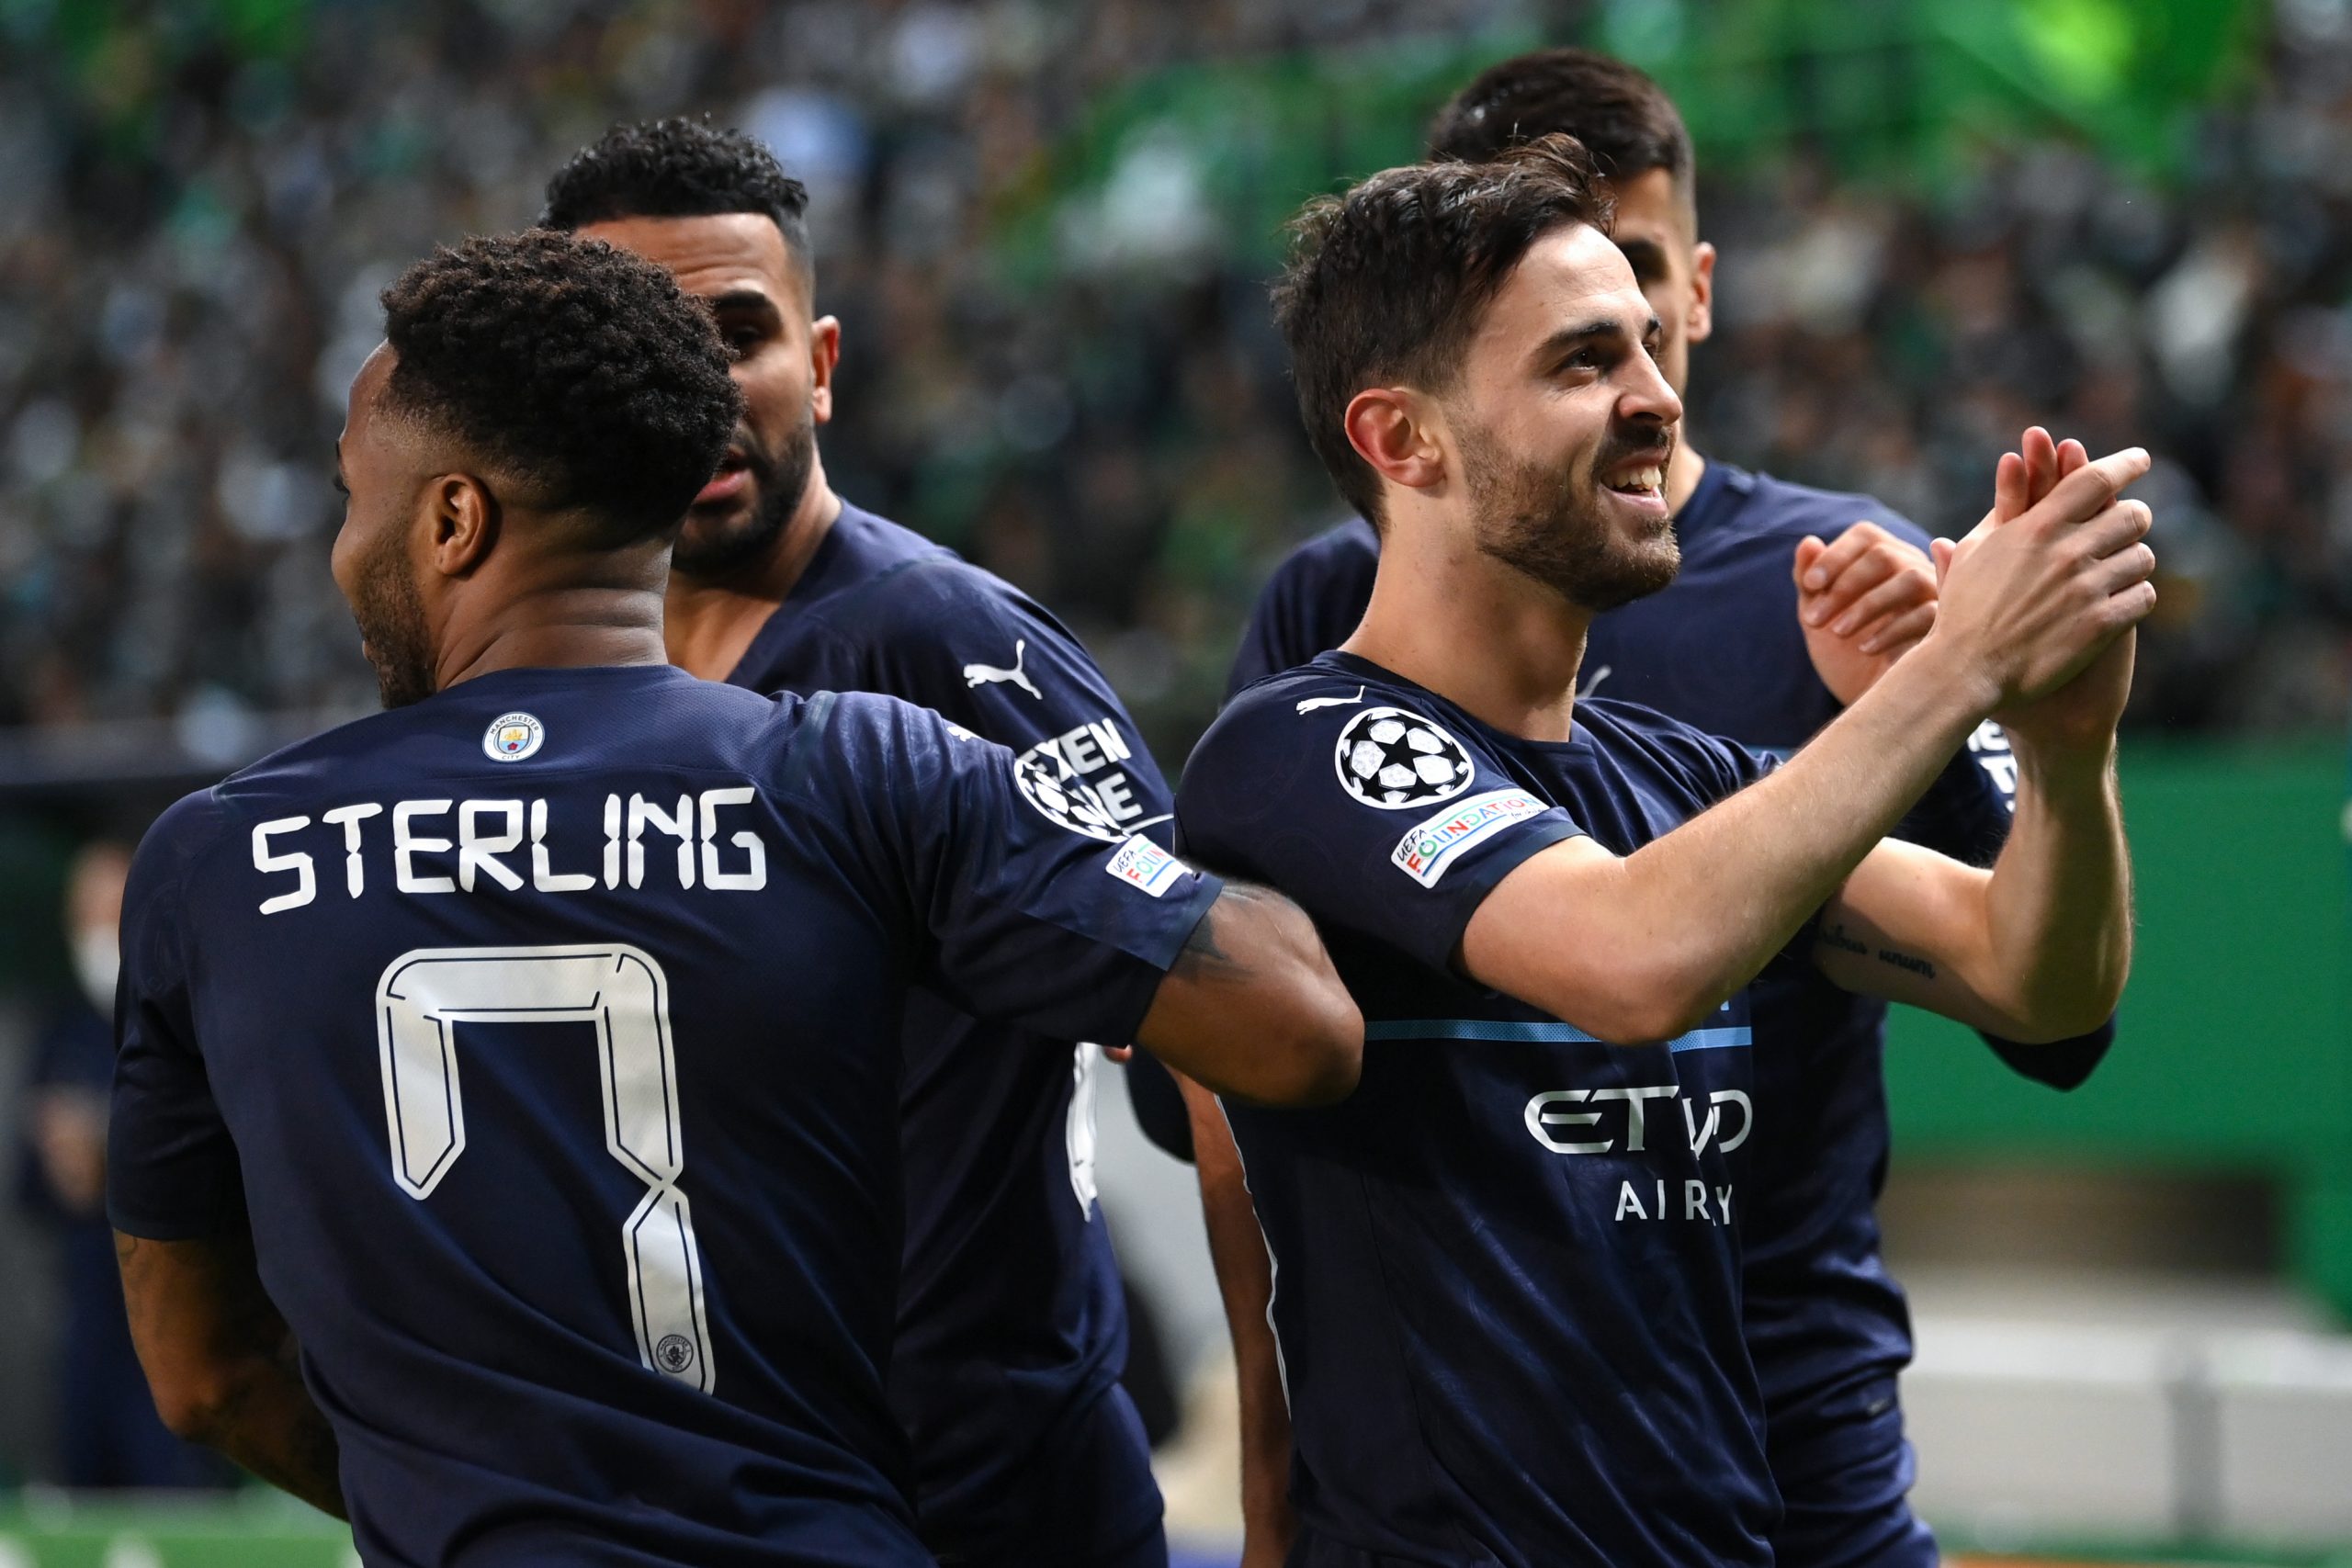 Manchester City players celebrates a goal against Sporting CP